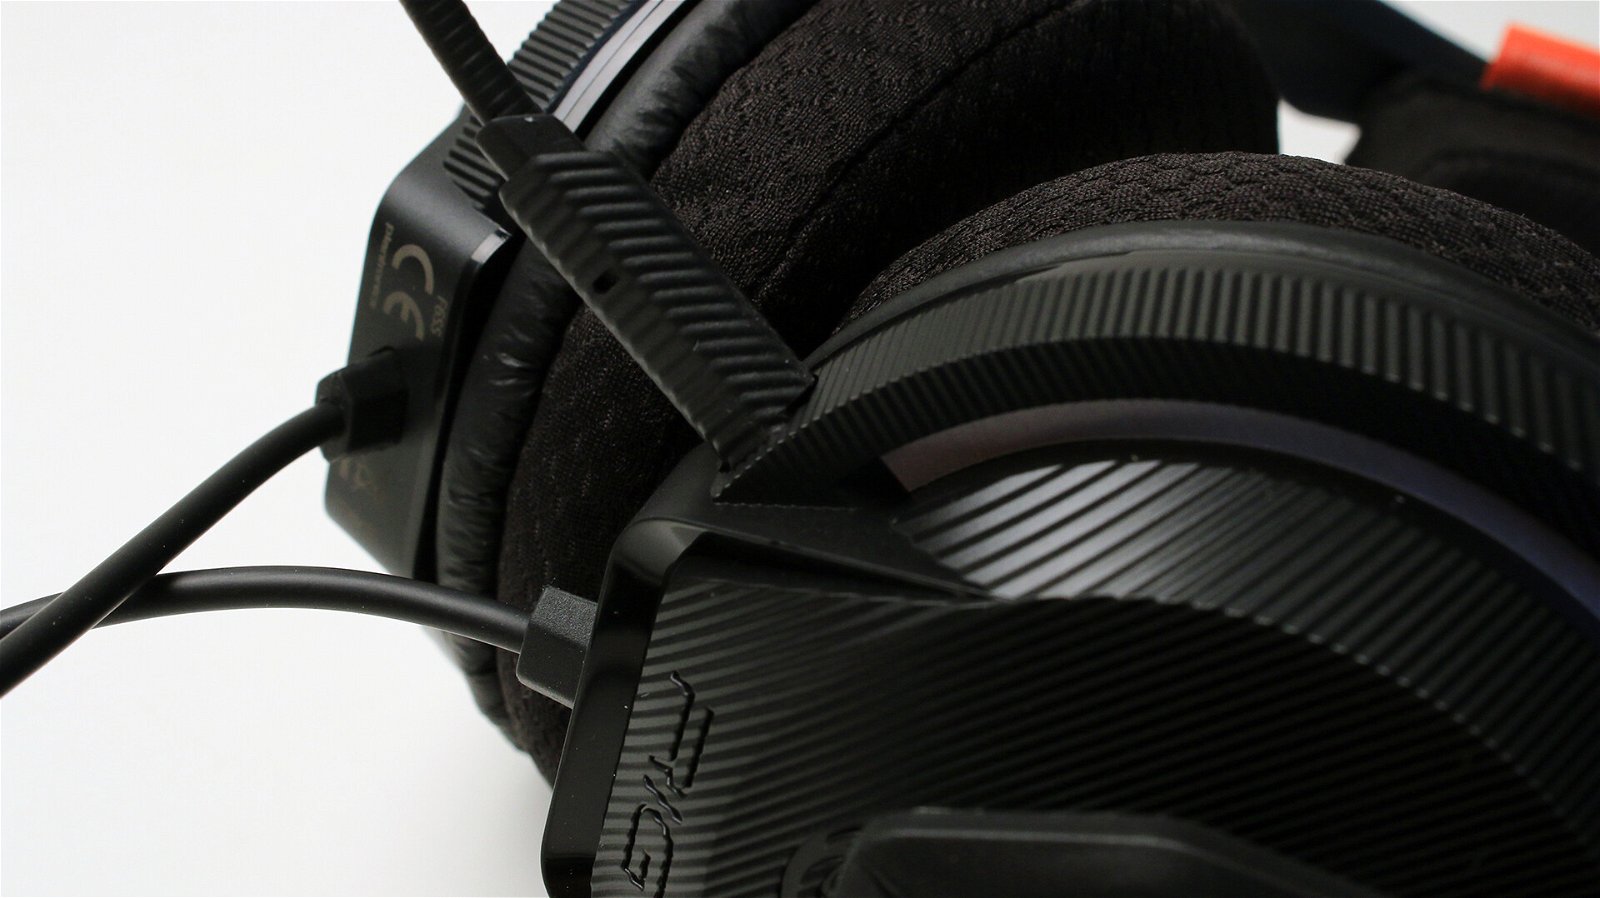 Rig 400 Hs Headset (Hardware) Review 4